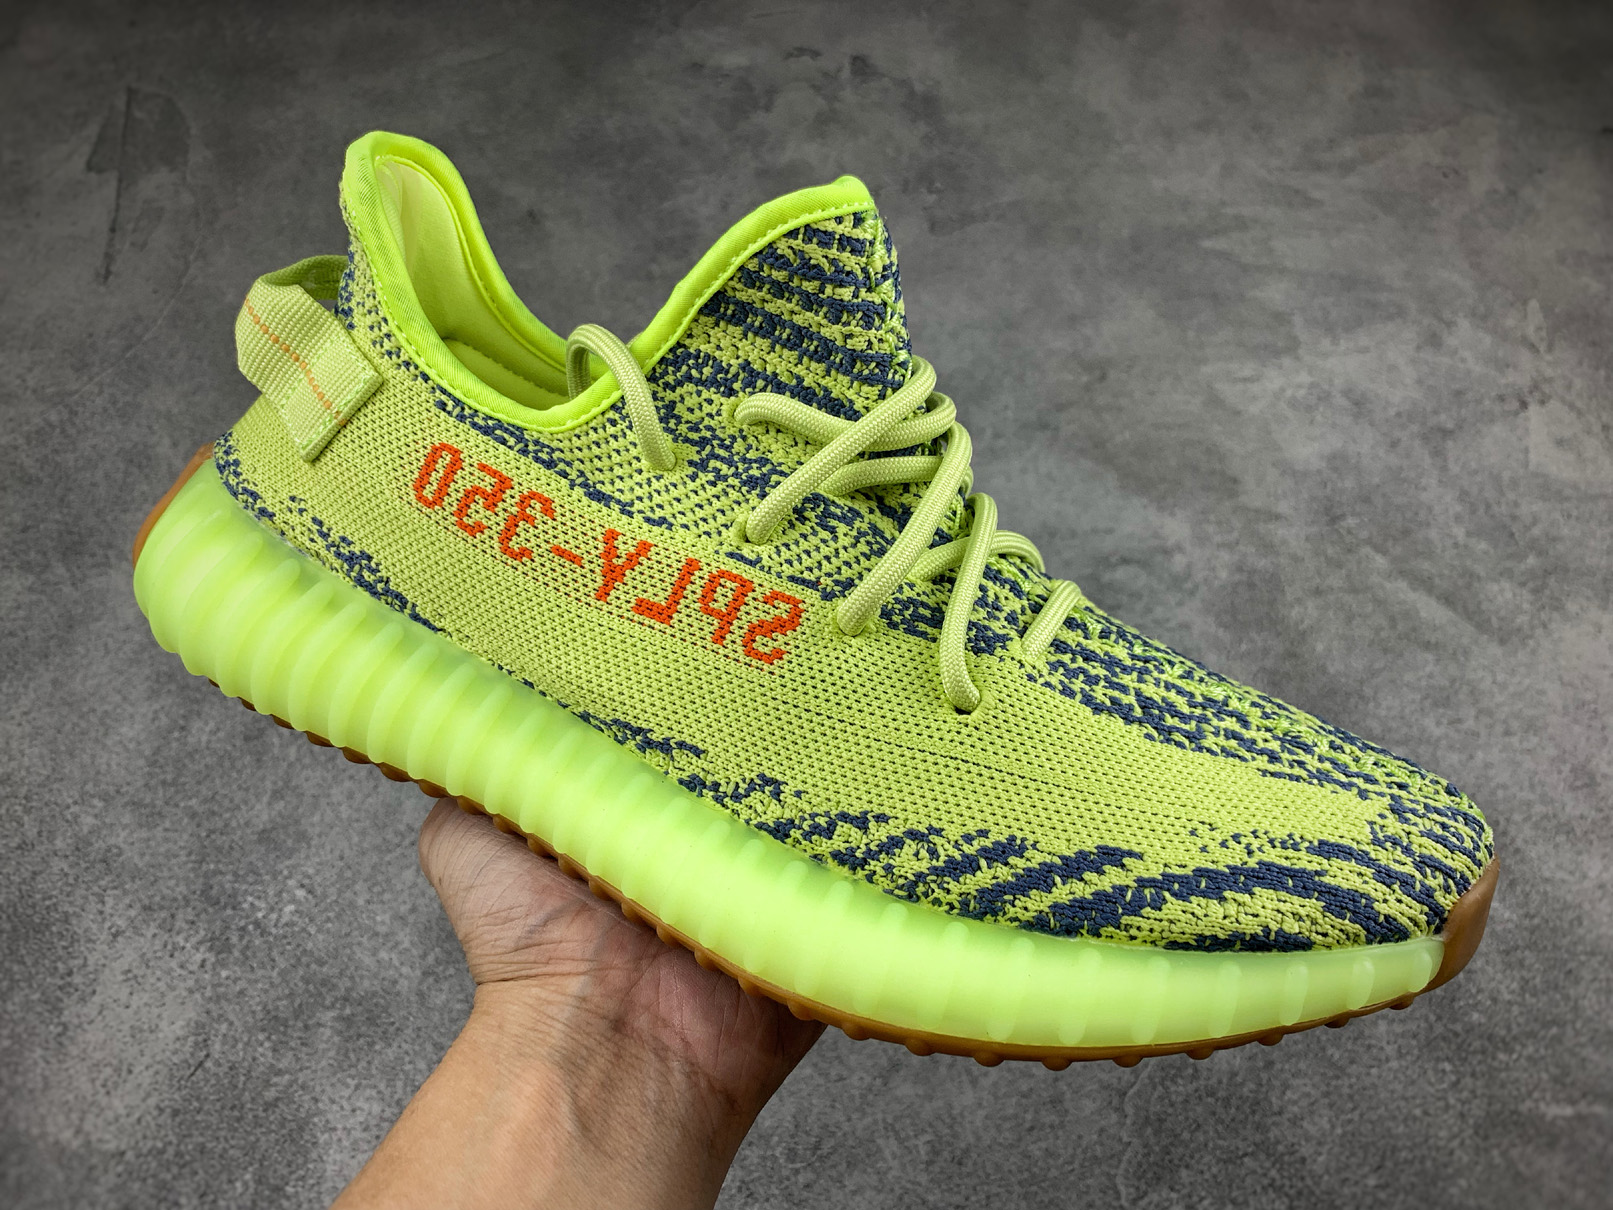 Adidas Fake Adidas Yeezy boost 350 v2 frozen yellow Wholesale with free ...